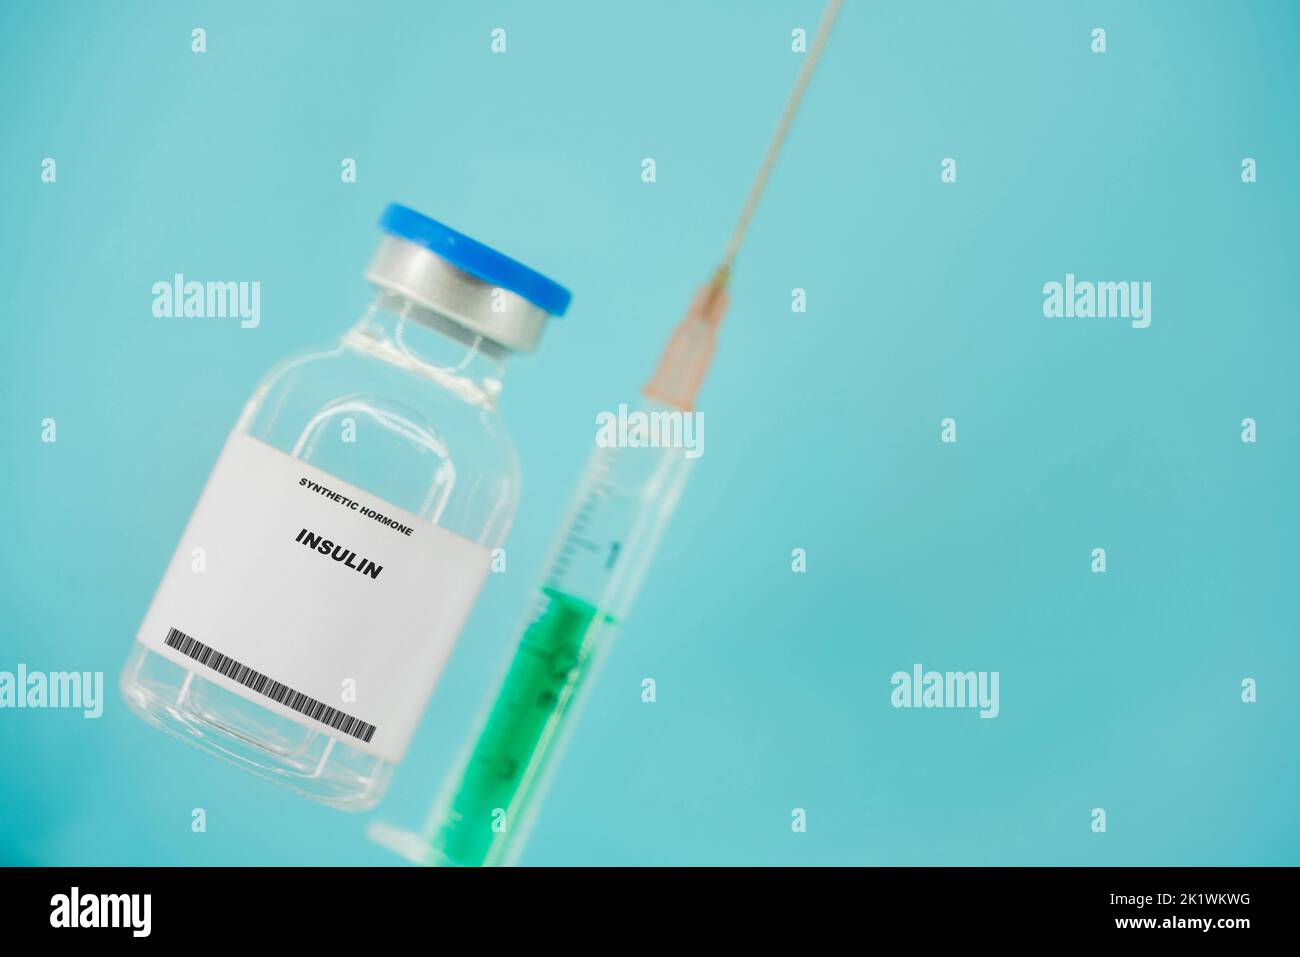 Insulin syringe and vial, conceptual image Stock Photo